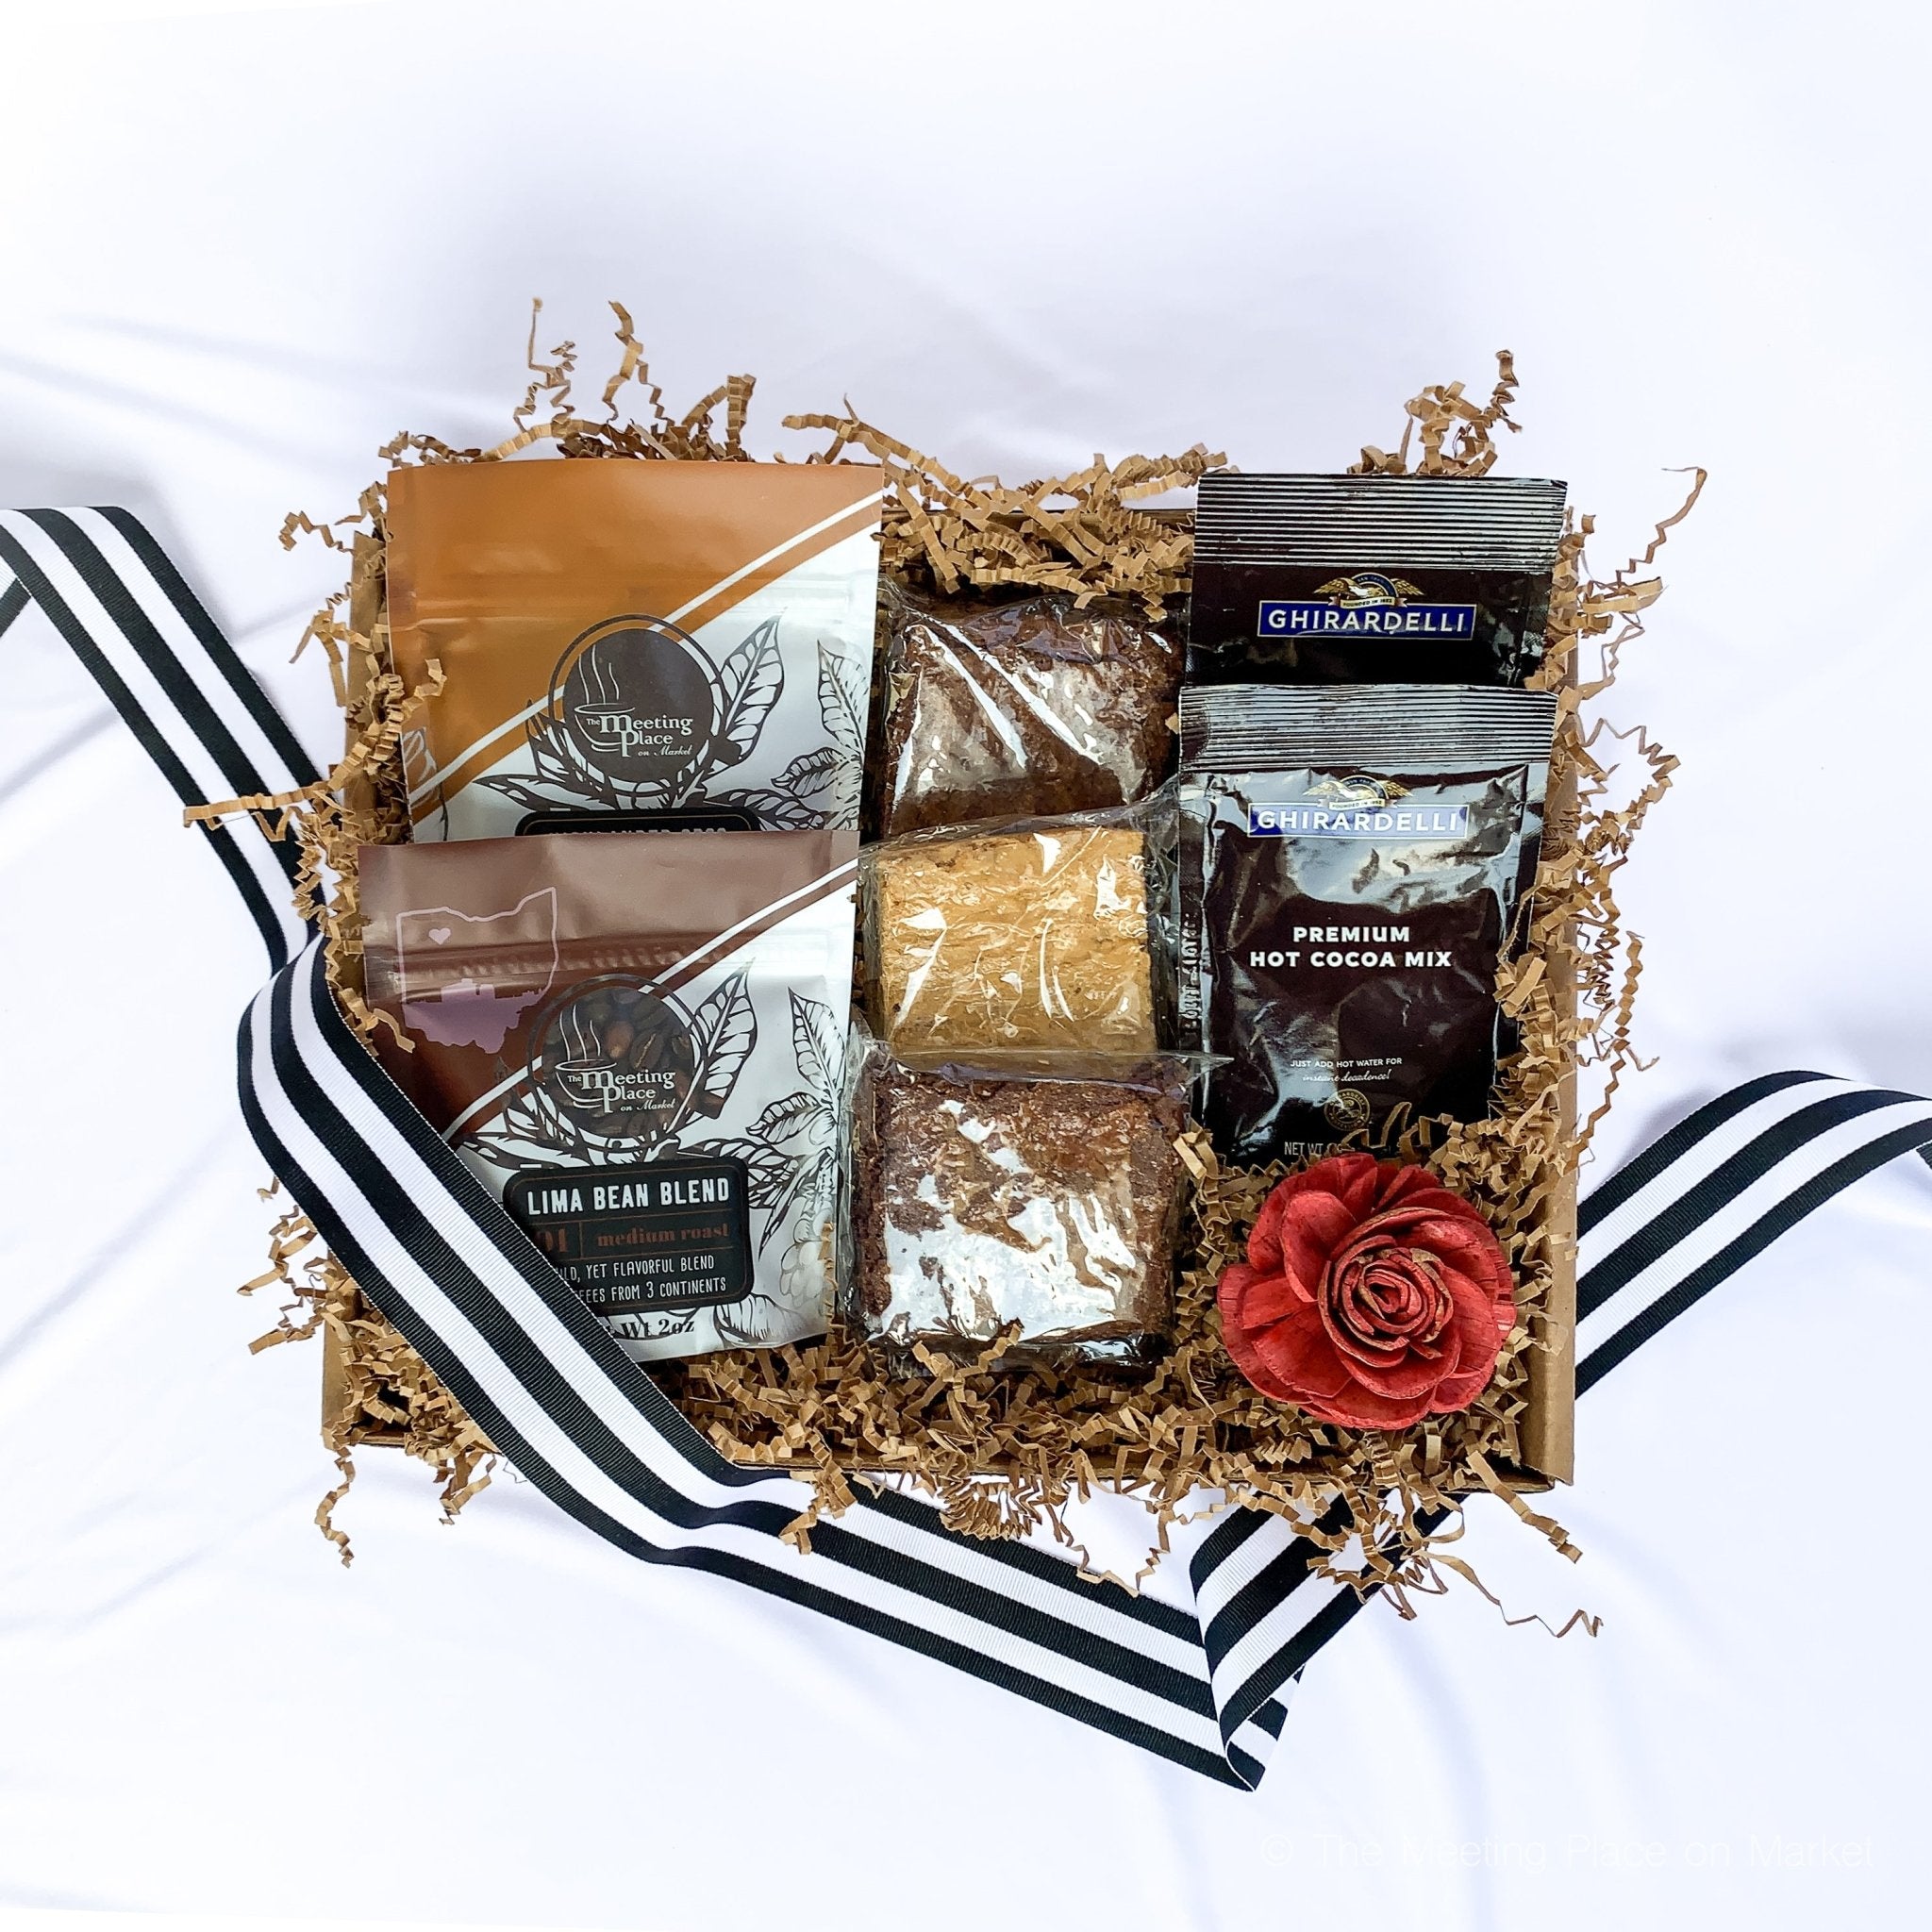 Amazon.com: Gift Basket Village - Coffee Shop for Sisters: Gourmet Coffee,  Mocha Mixes, Chocolate Spoons, and Mugs, Perfect Sisterly Gift, Handcrafted  in the USA : Grocery & Gourmet Food